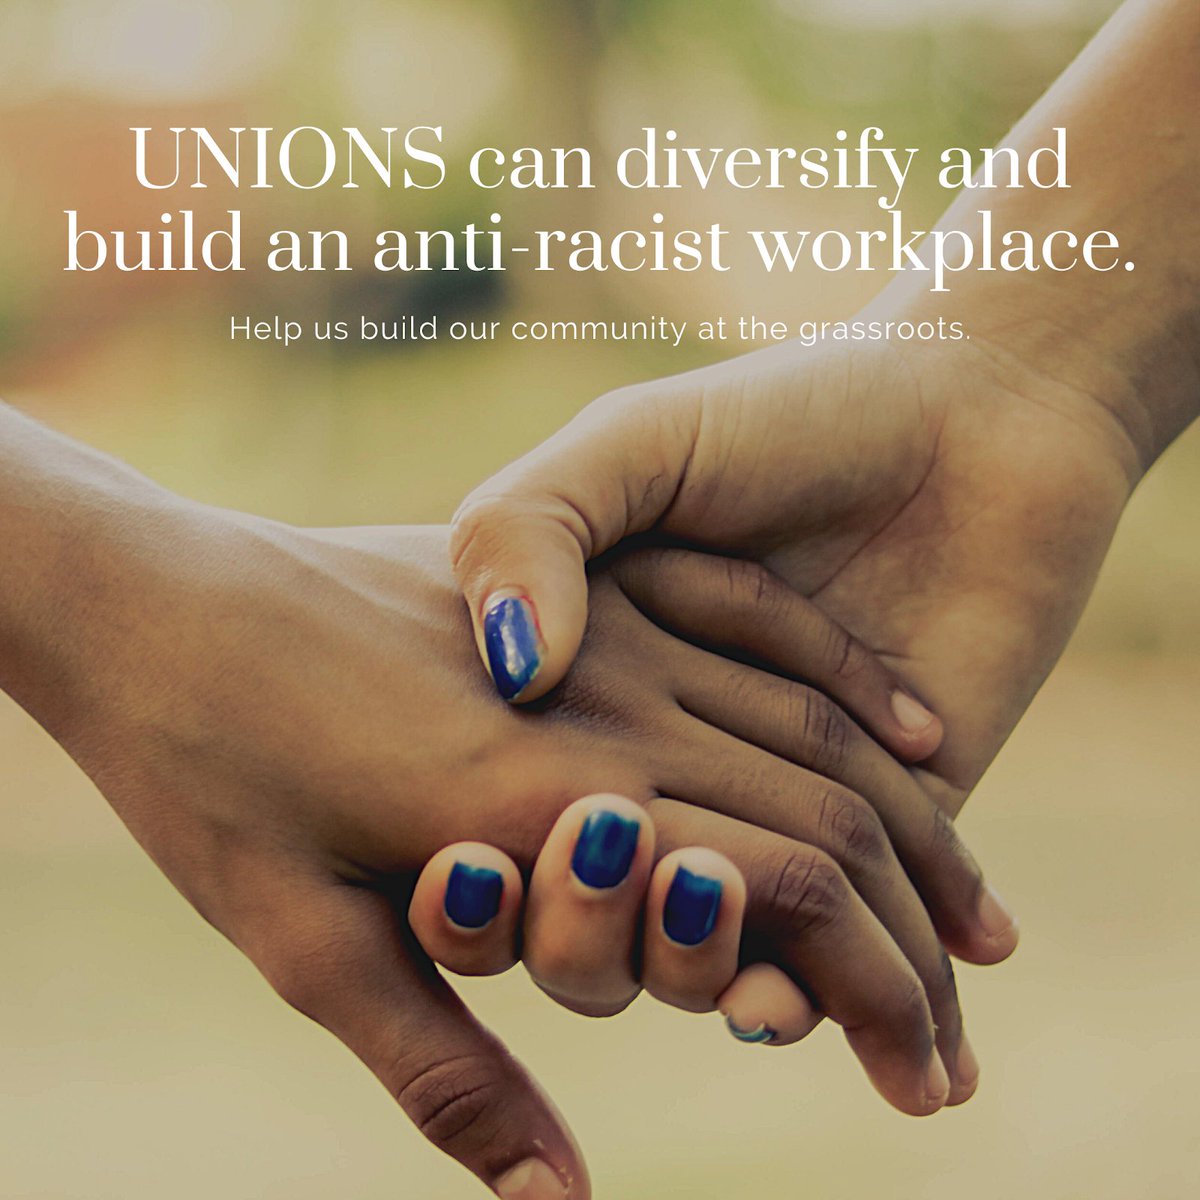 Currently our workplace does not reflect the diverse racial make-up of our home base of Atlanta, GA. With a union, we can advocate for more local hiring and programs that can uplift our workplace and community.

#FloydCountyProductionGuild #UnionizeTheSouth #UnionStrong